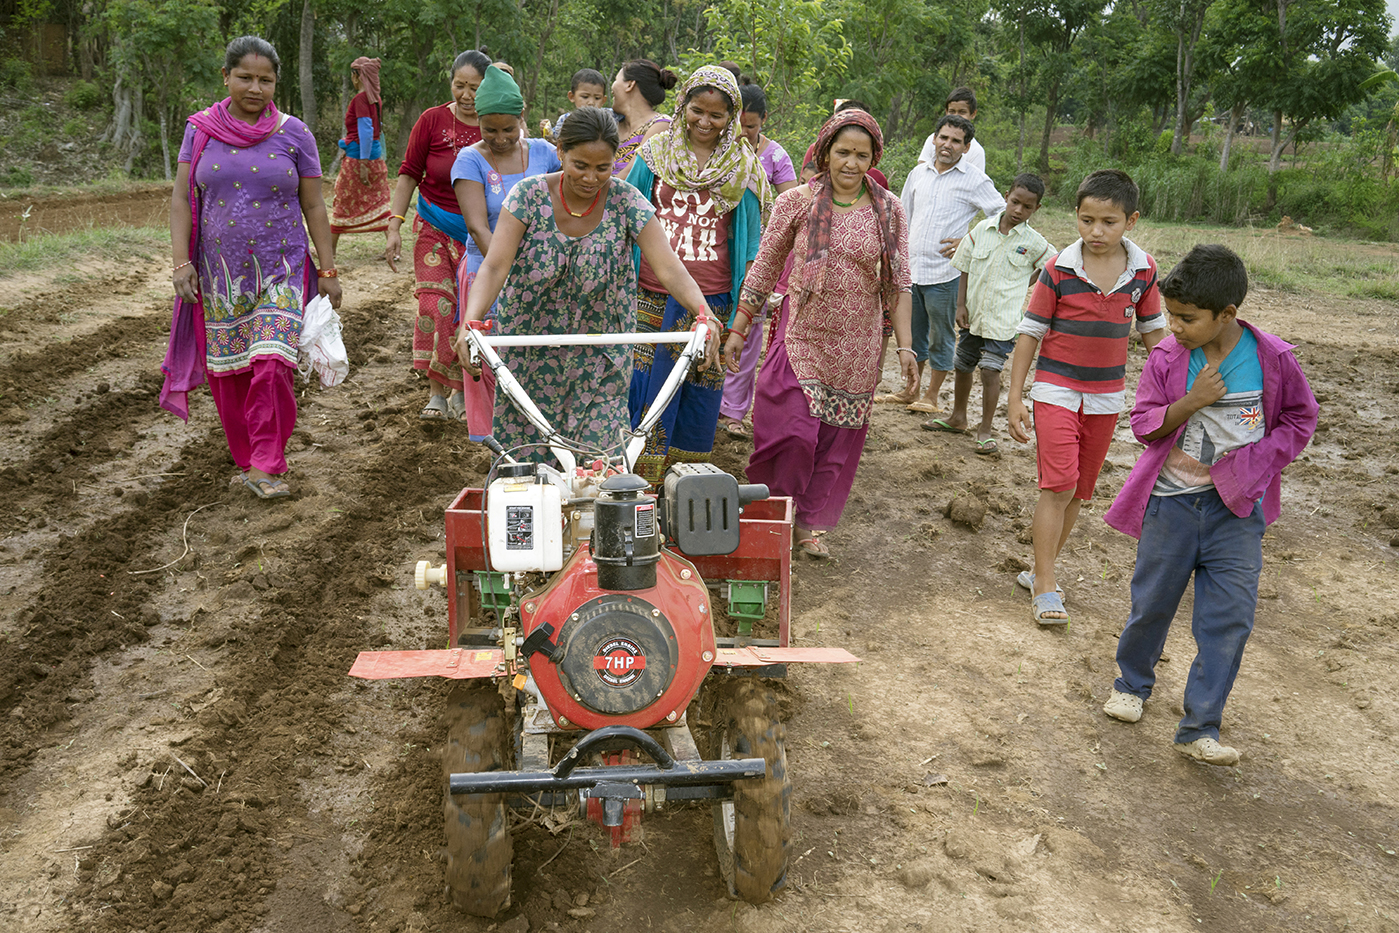 Women in Nepal using agricultural machinery. (Photo: Peter Lowe/CIMMYT)